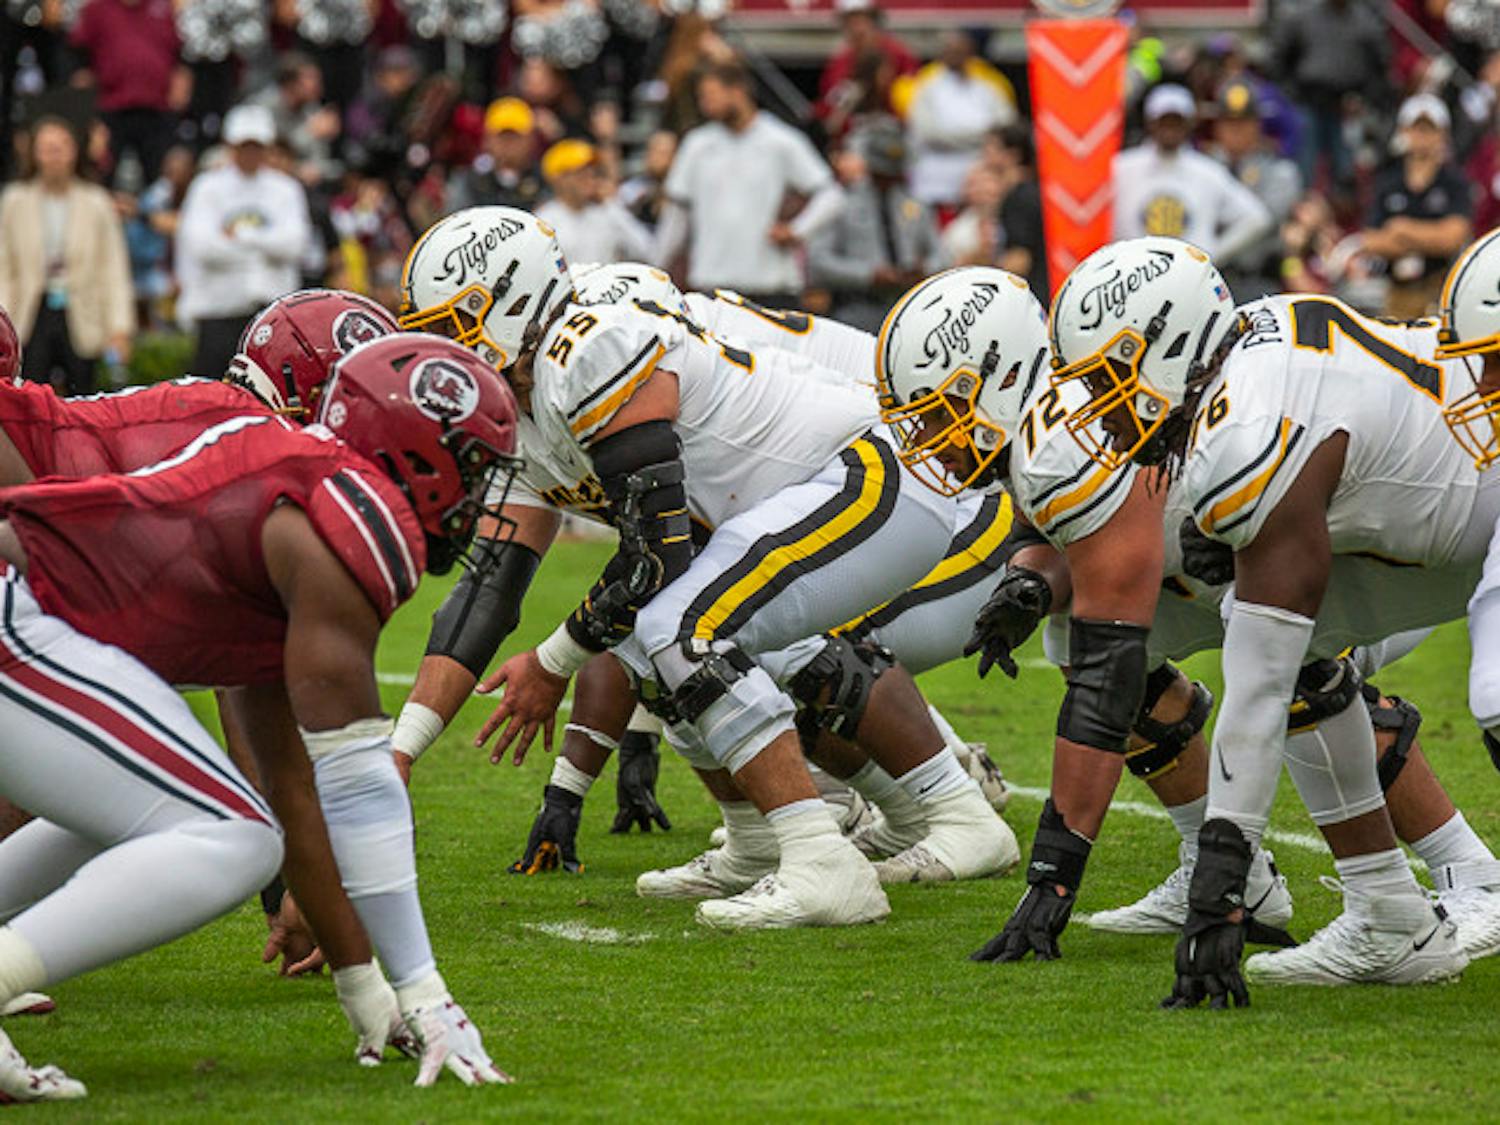 The Missouri offensive line getting into position opposite of the South Carolina defensive line before a play on Oct. 29, 2022. Missouri held a strong defense against the Gamecocks, only allowing the latter to push 203 yards in the game, while Missouri made a total of 367 yards.